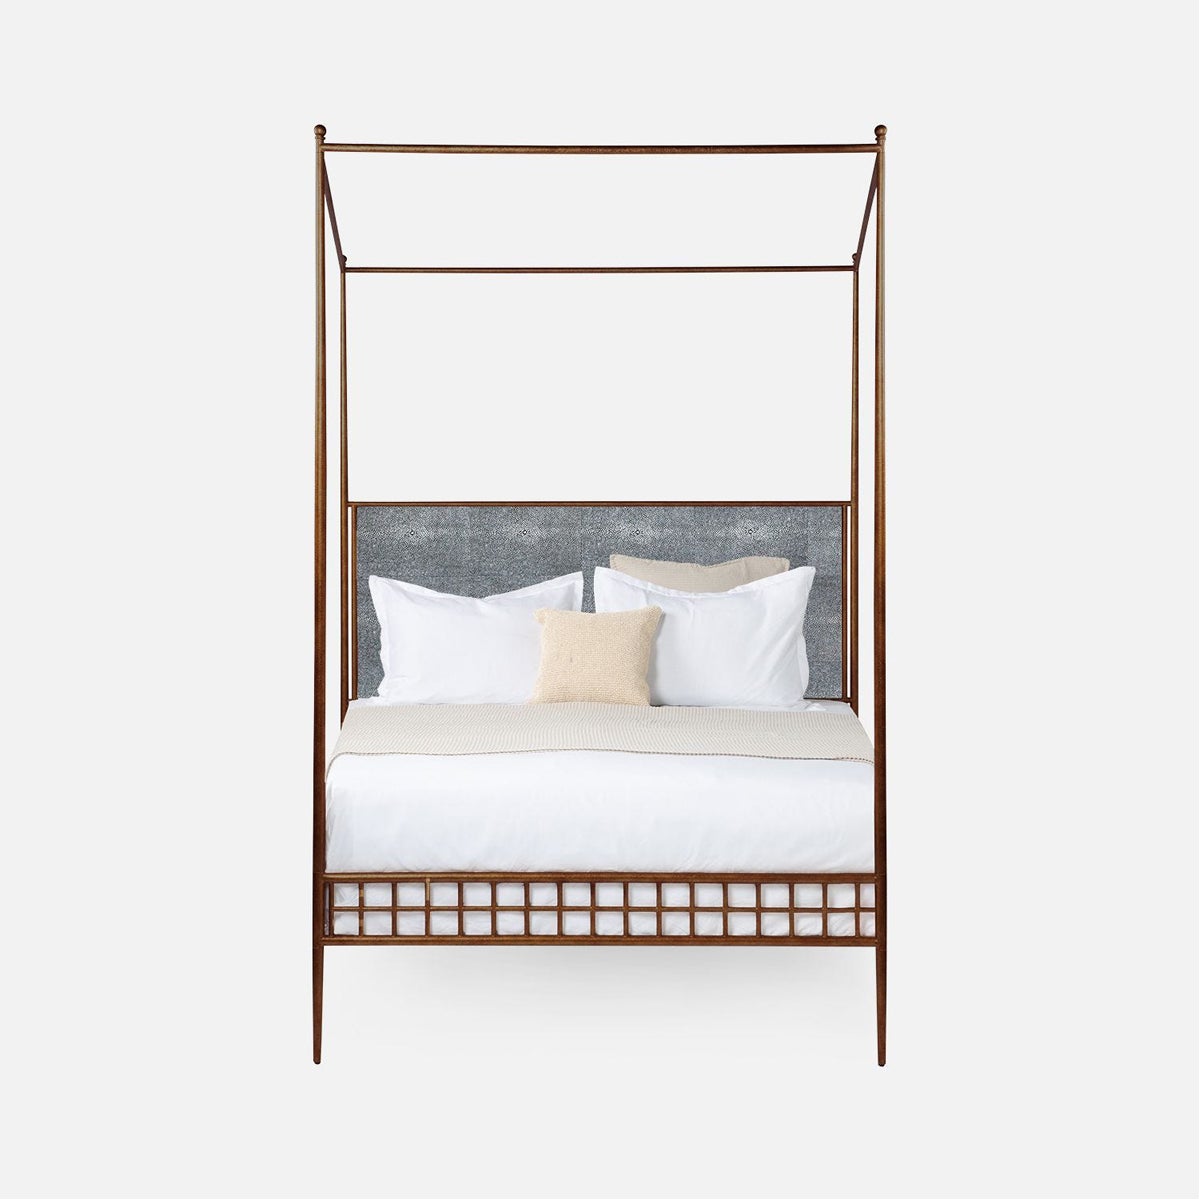 Made Goods Hamilton Textured Iron Canopy Bed in Oak